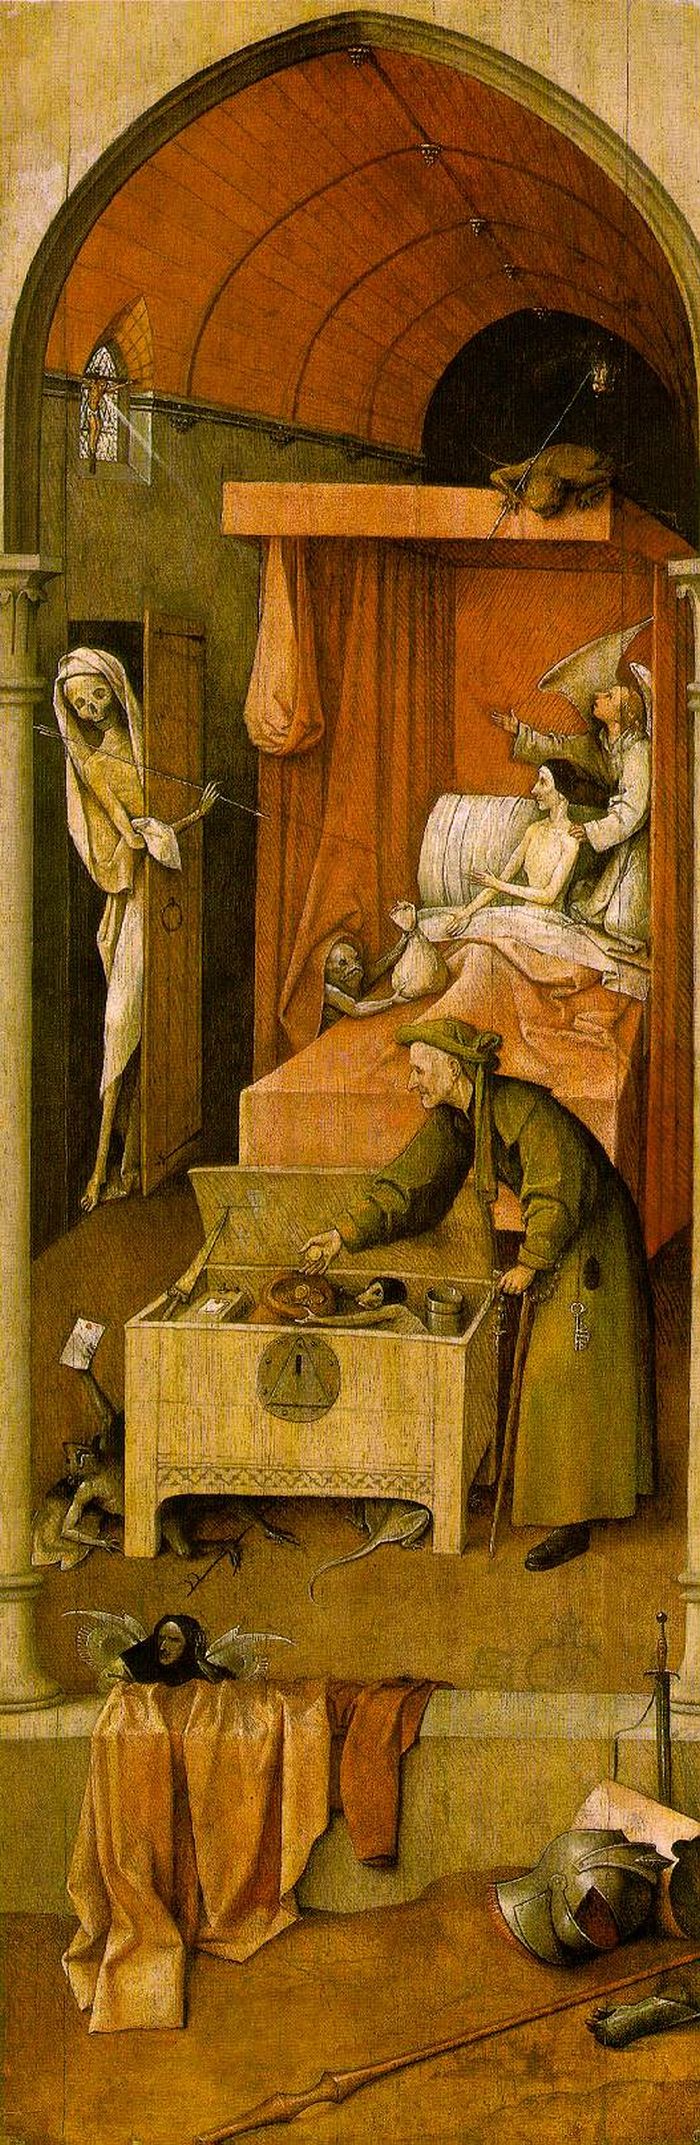 Hieronymus Bosch: Death and the Miser - 1485-1490